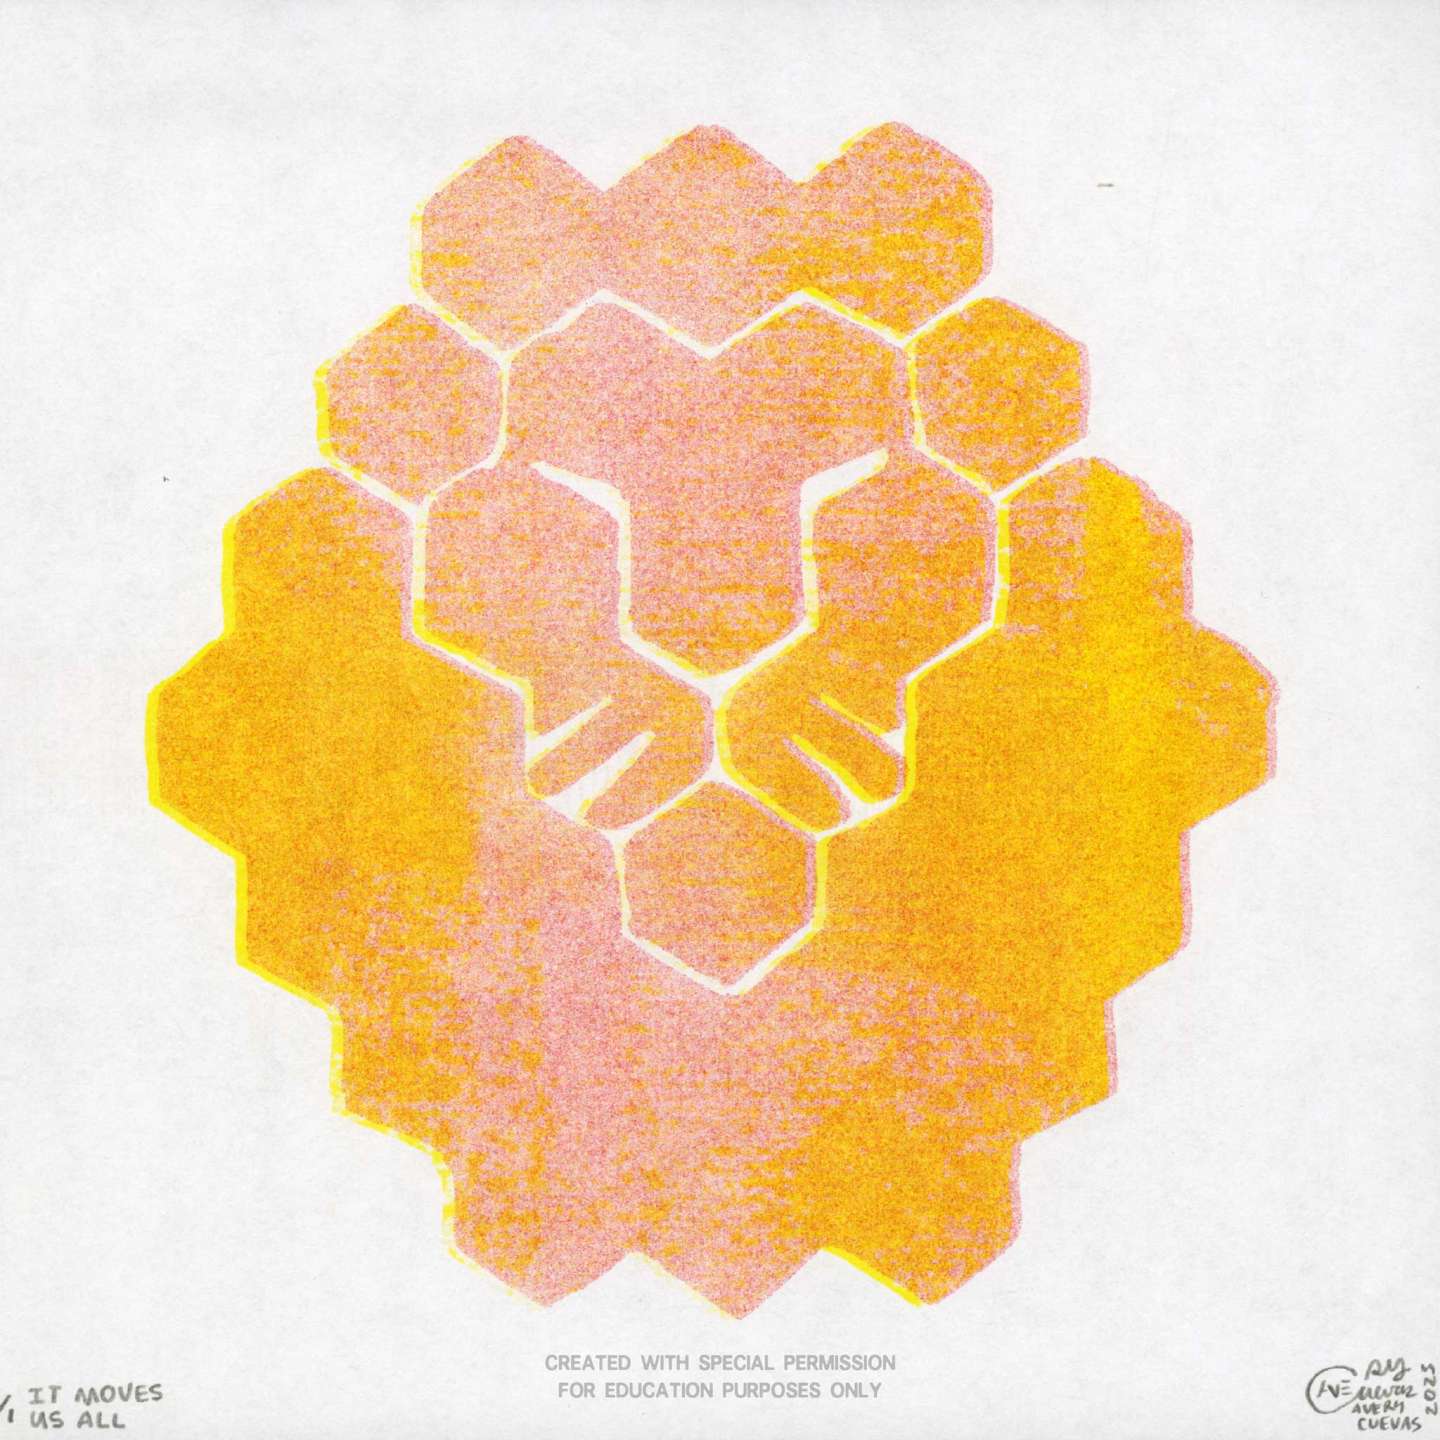 Risograph - The Lion King